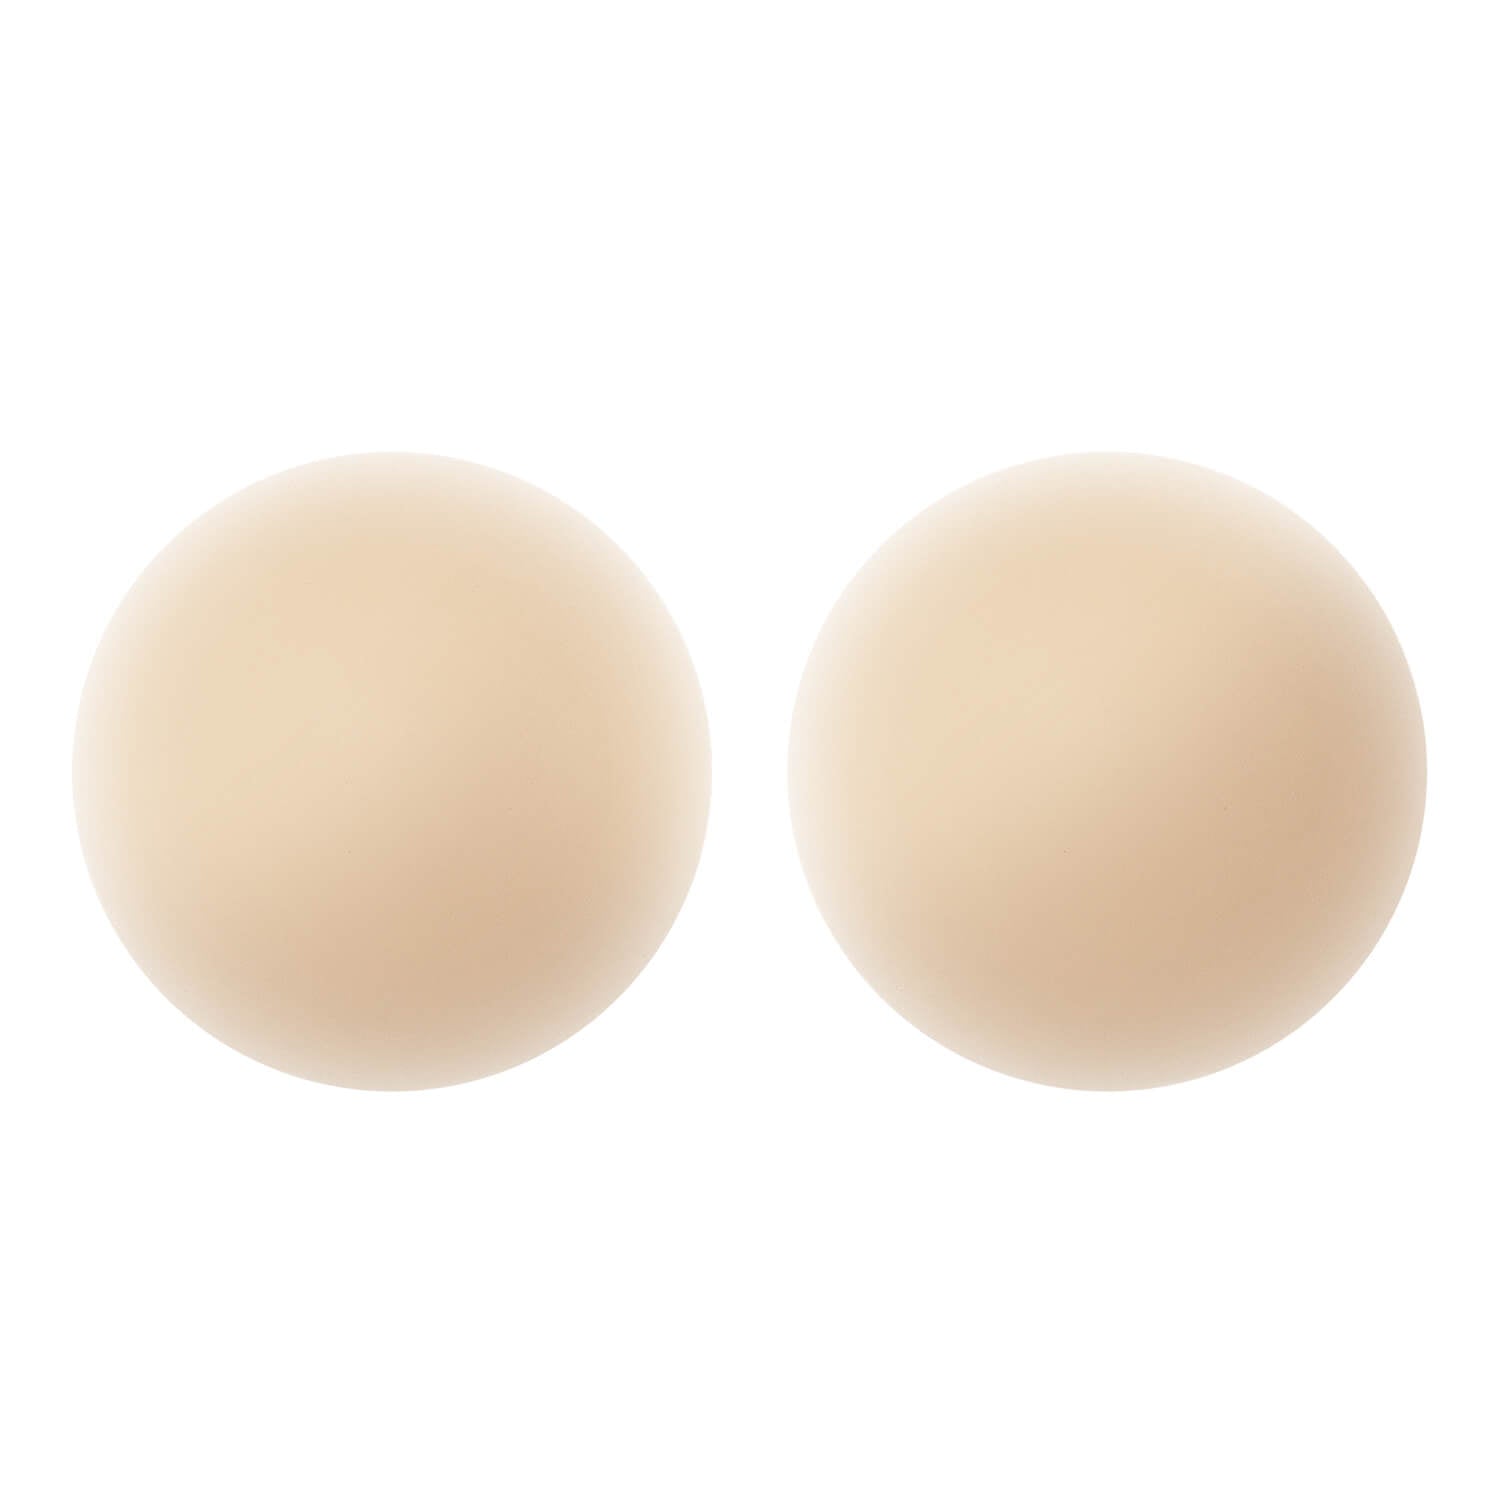 Reusable Nipple Covers - Hypoallergenic Adhesive Silicone Nipple Coverings  with Travel Box